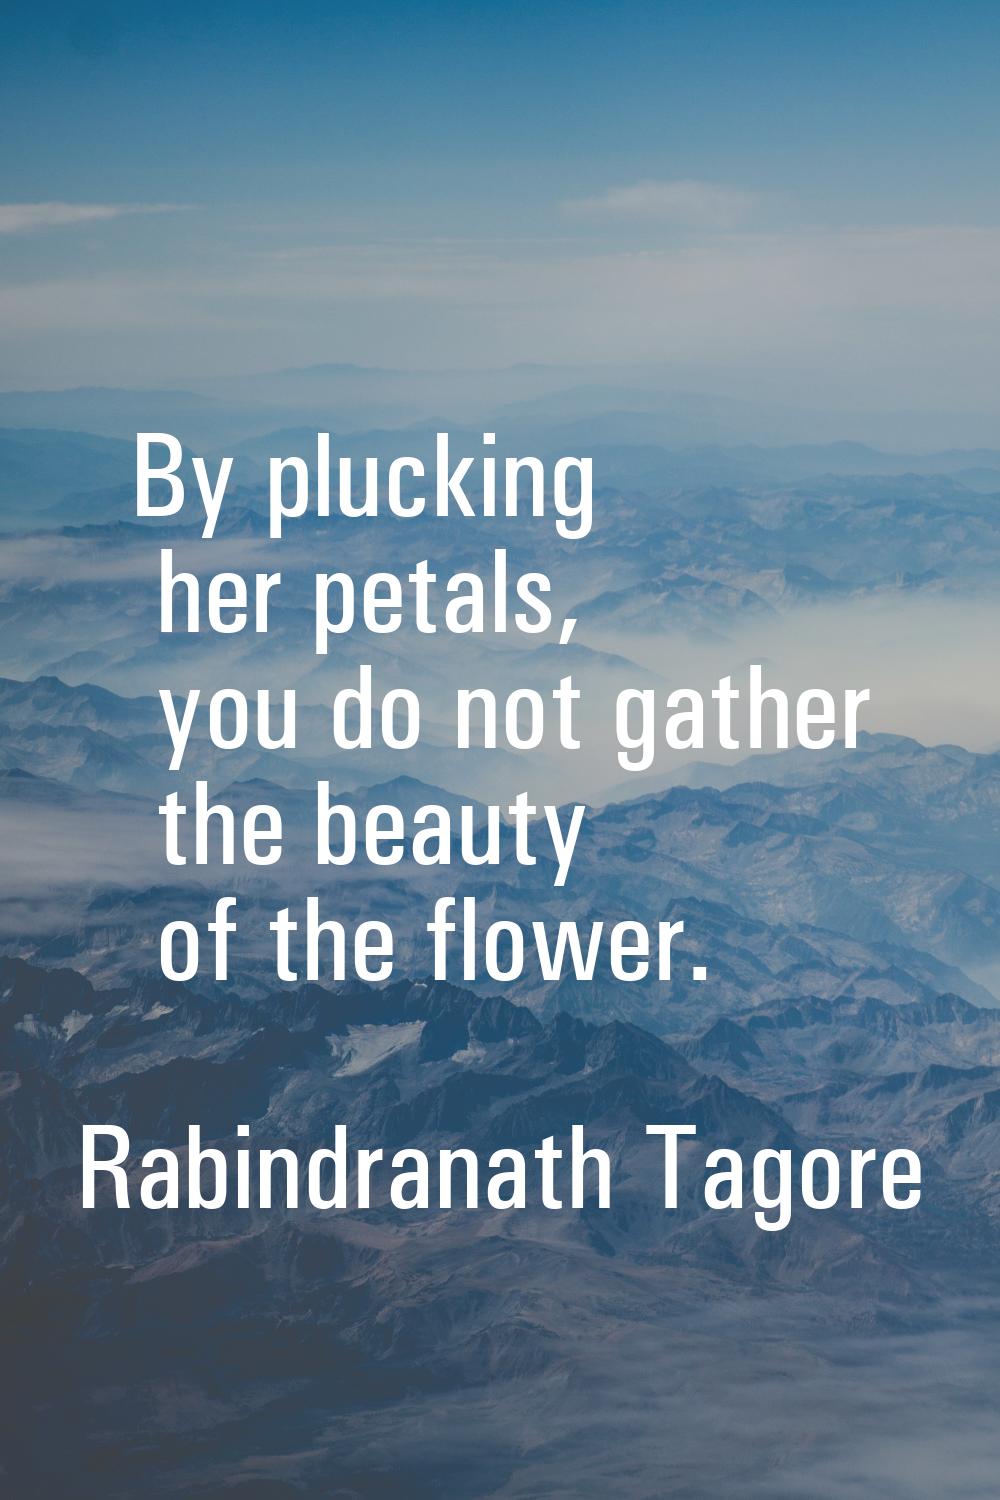 By plucking her petals, you do not gather the beauty of the flower.